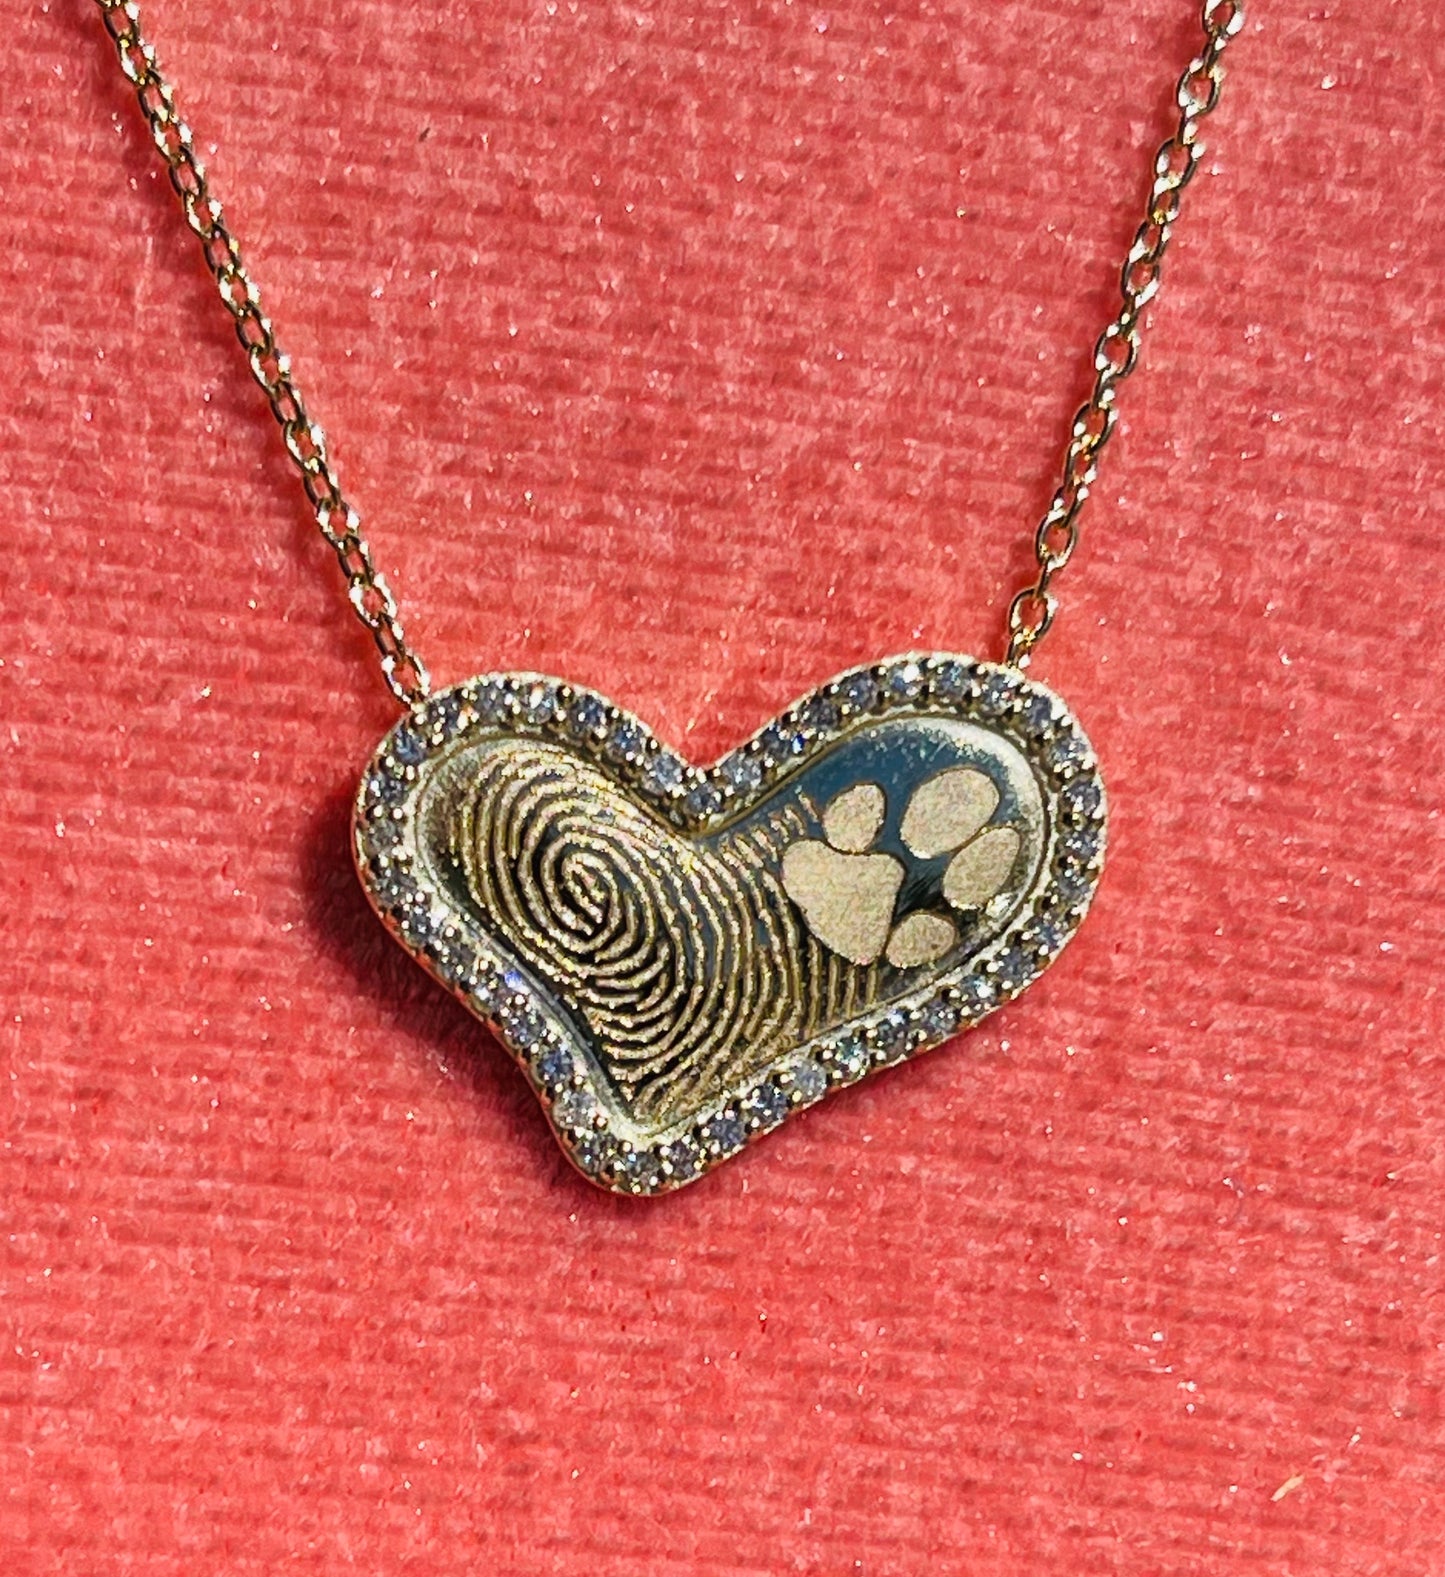 Moms and Memories: Fingerprint Necklaces for Daughters Going Off to College